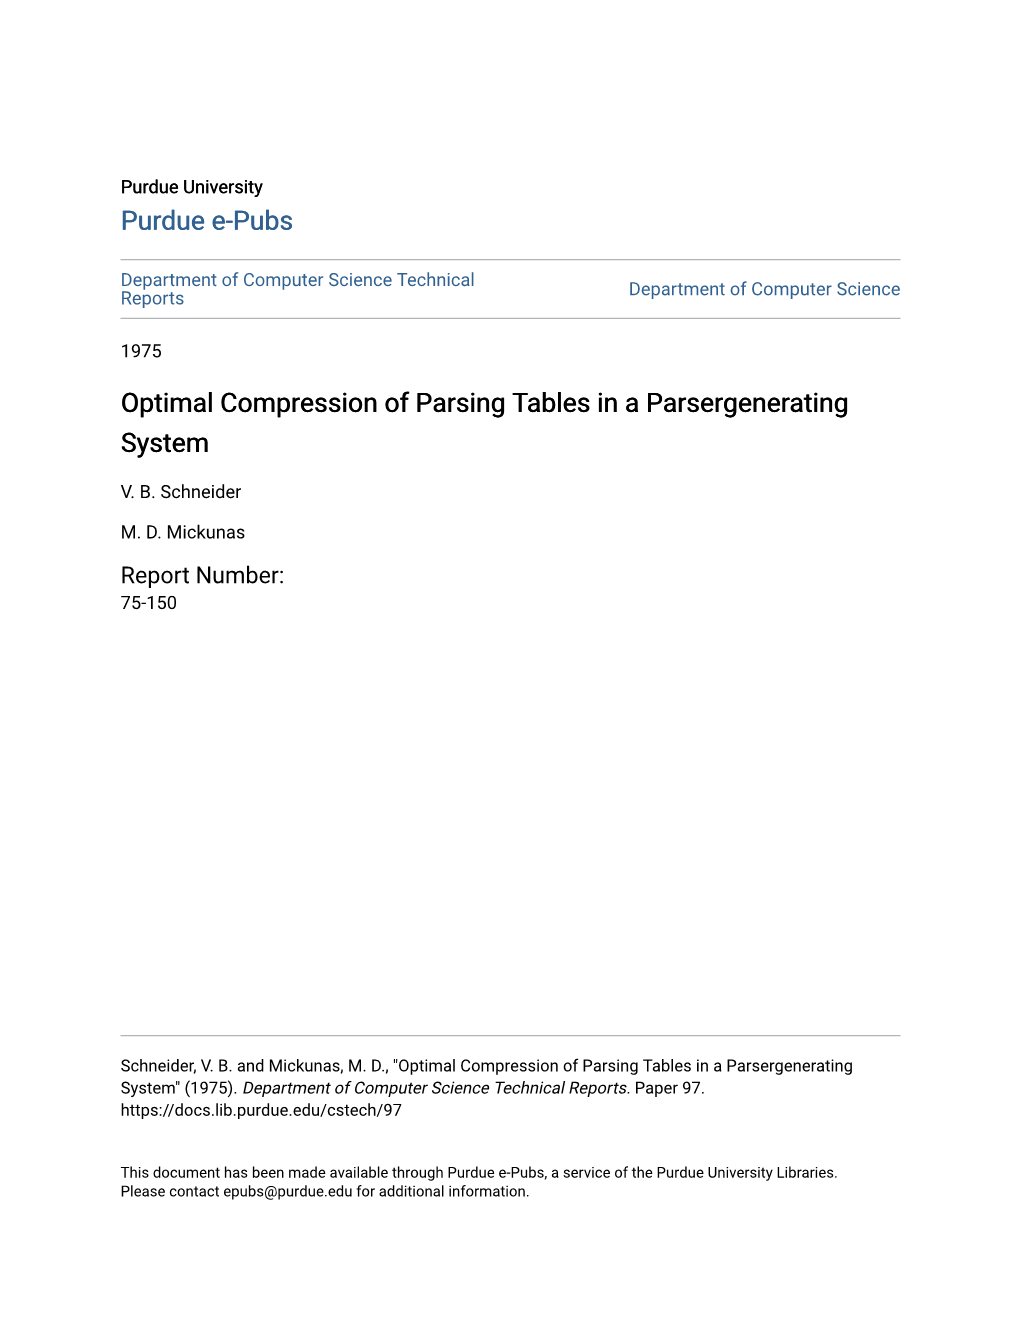 Optimal Compression of Parsing Tables in a Parsergenerating System